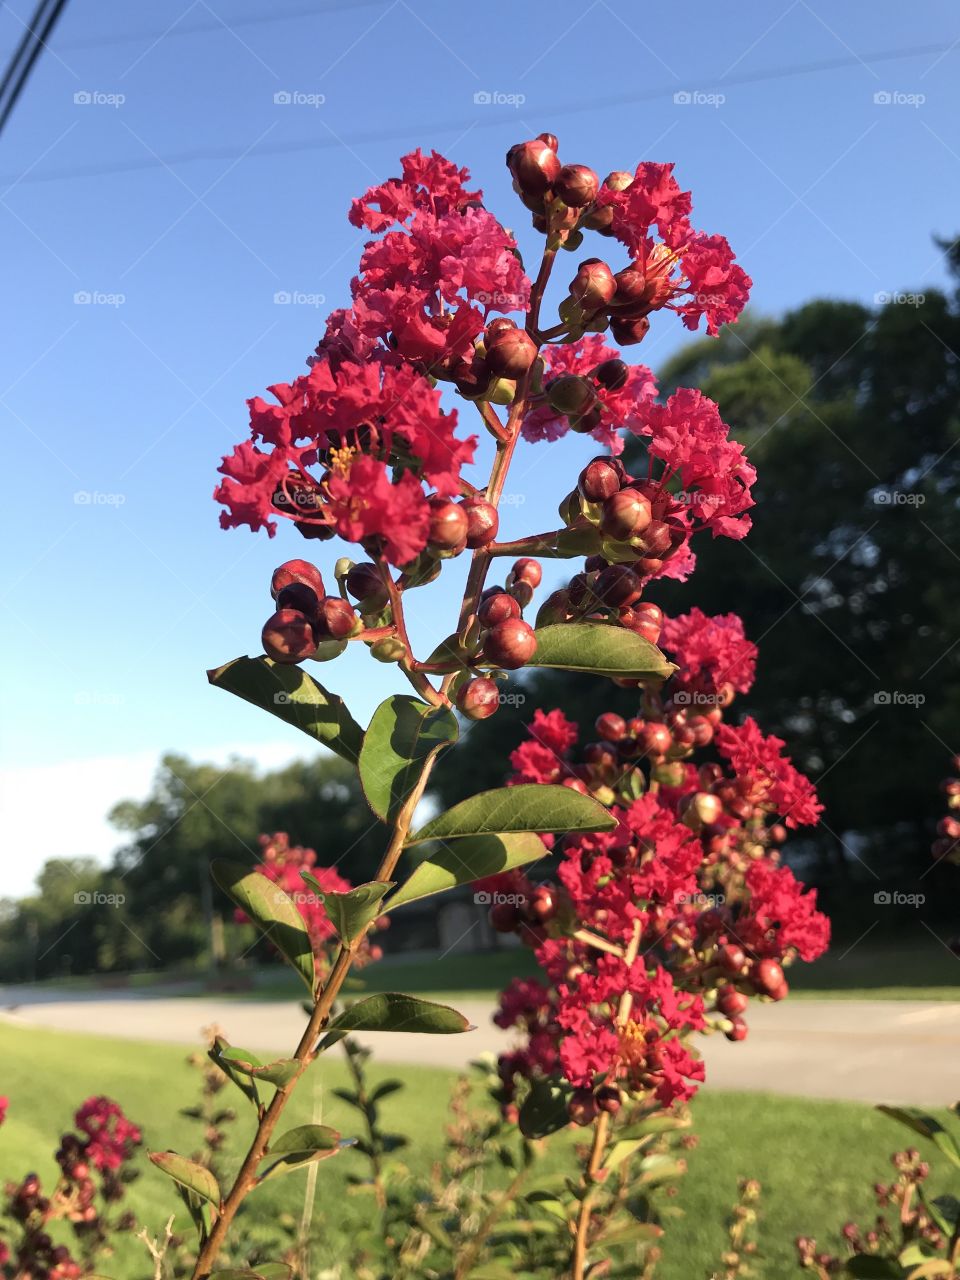 Crapemyrtle trees are starting to bloom!